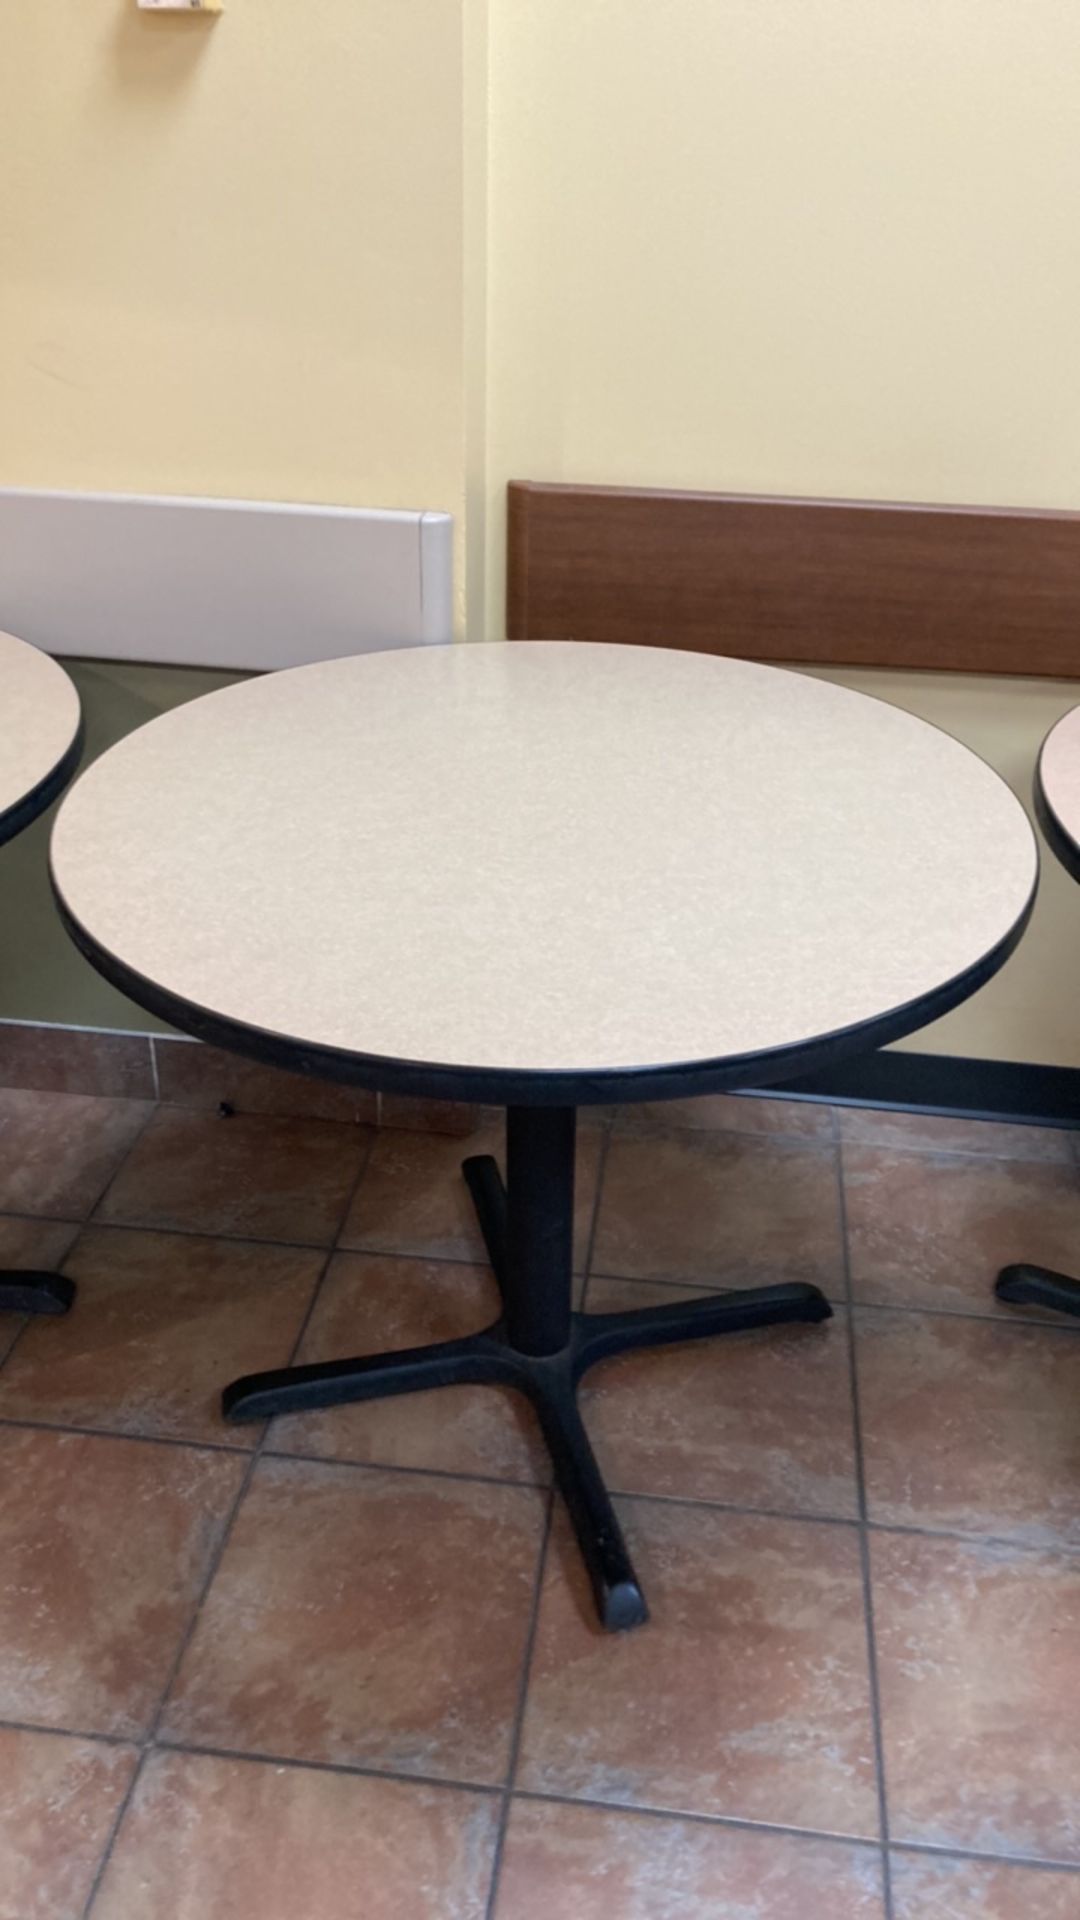 LOT OF 2 CIRCULAR TABLES - Image 3 of 3